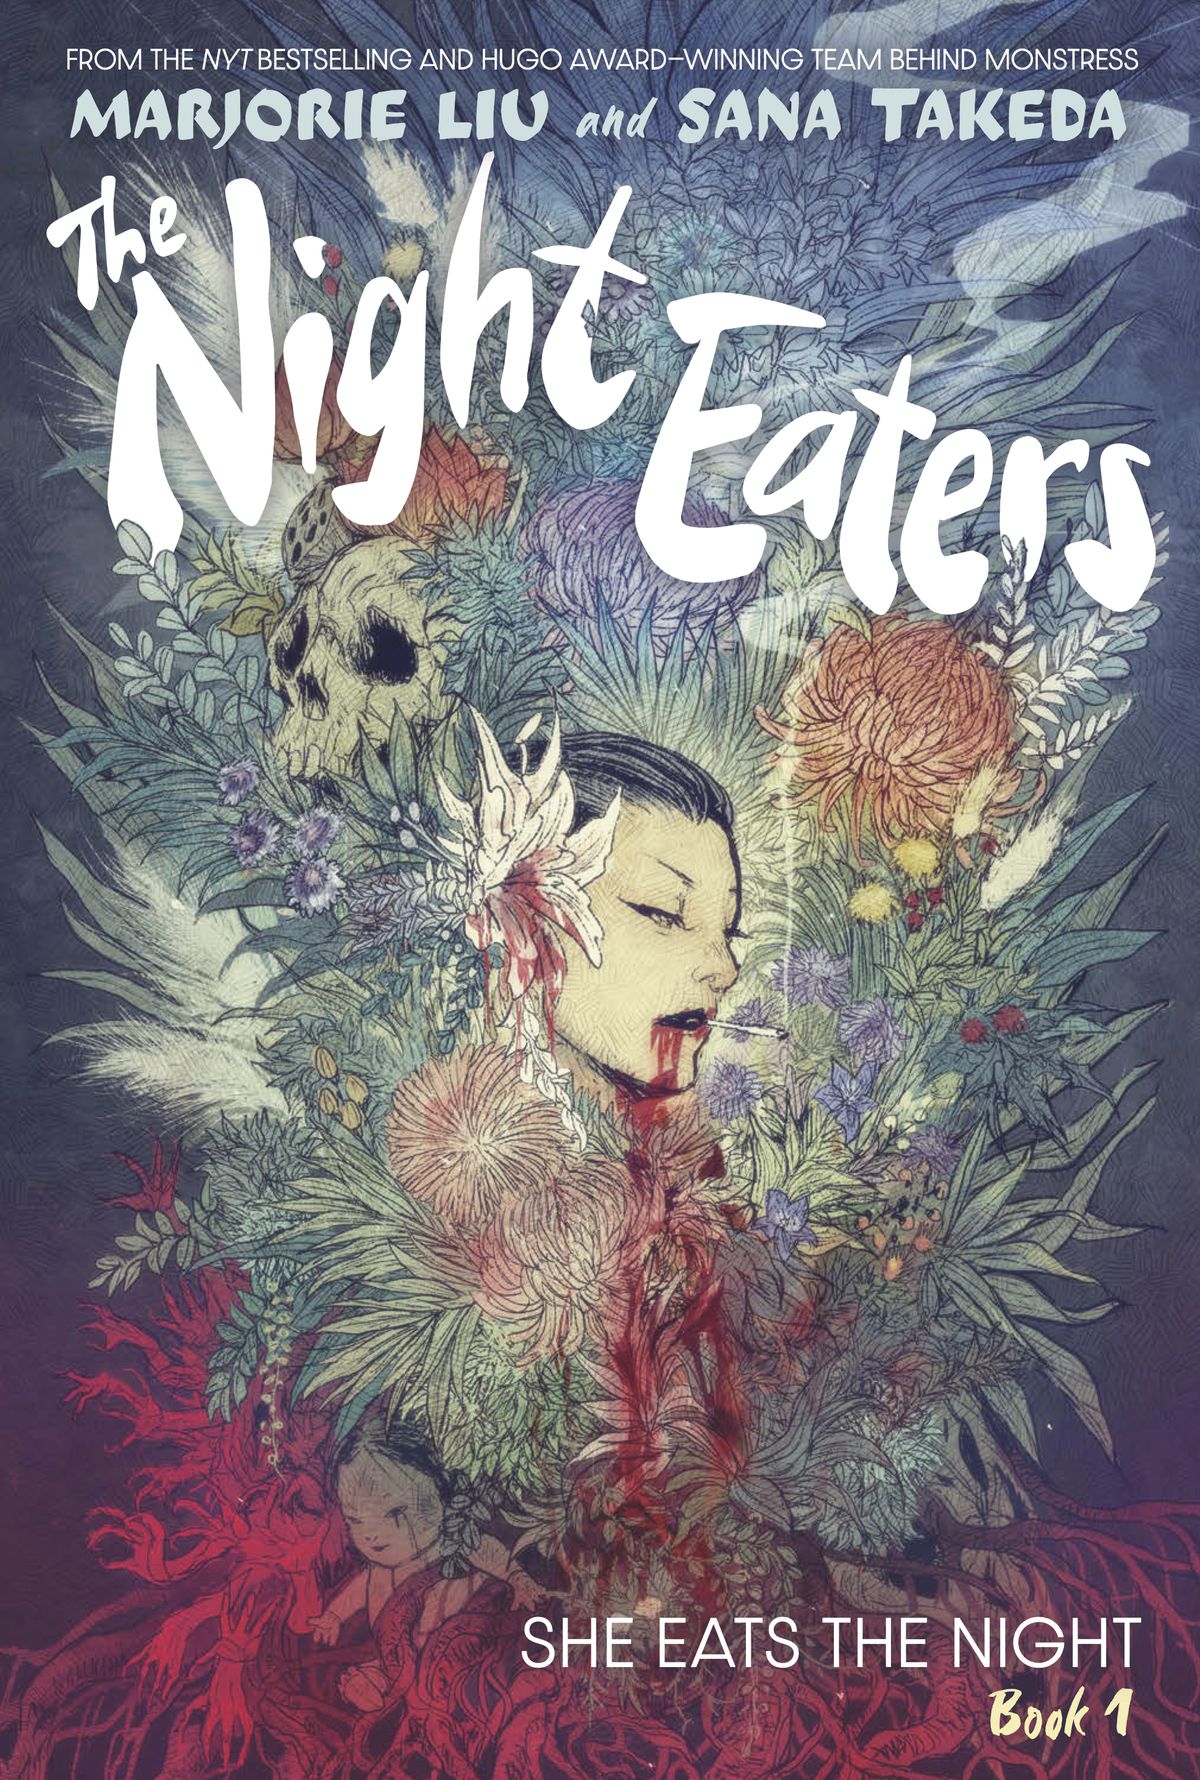 The cover of Night Eaters Book 1: She Eats the Night centers on the head of an Asian woman with a lotus-like blossom in her hair, a cigarette dangling from her lips, and blood running from her mouth, all surrounded by a lush bouquet of flowers, with an embedded skull and a cracked doll, with blood-red roots turning to grasping hands below the bouquet